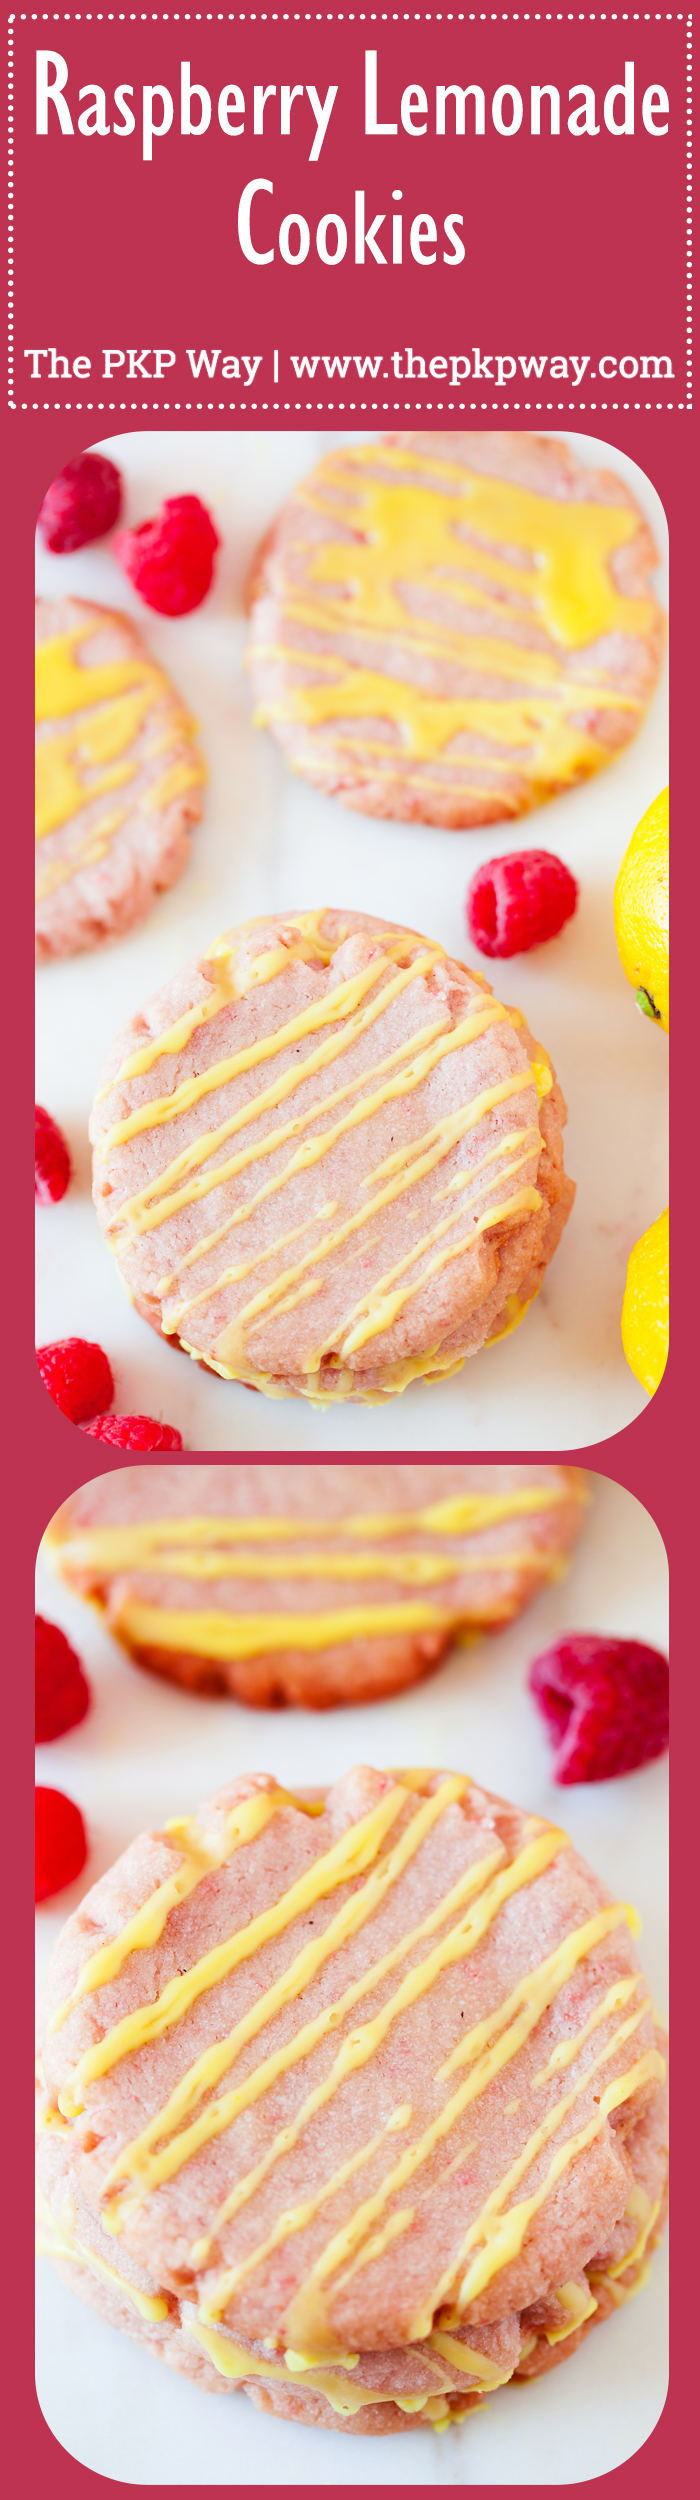 Made from fresh raspberry puree and lemon juice, these Raspberry Lemonade Cookies are perfect for your cookie jar and summer potlucks.